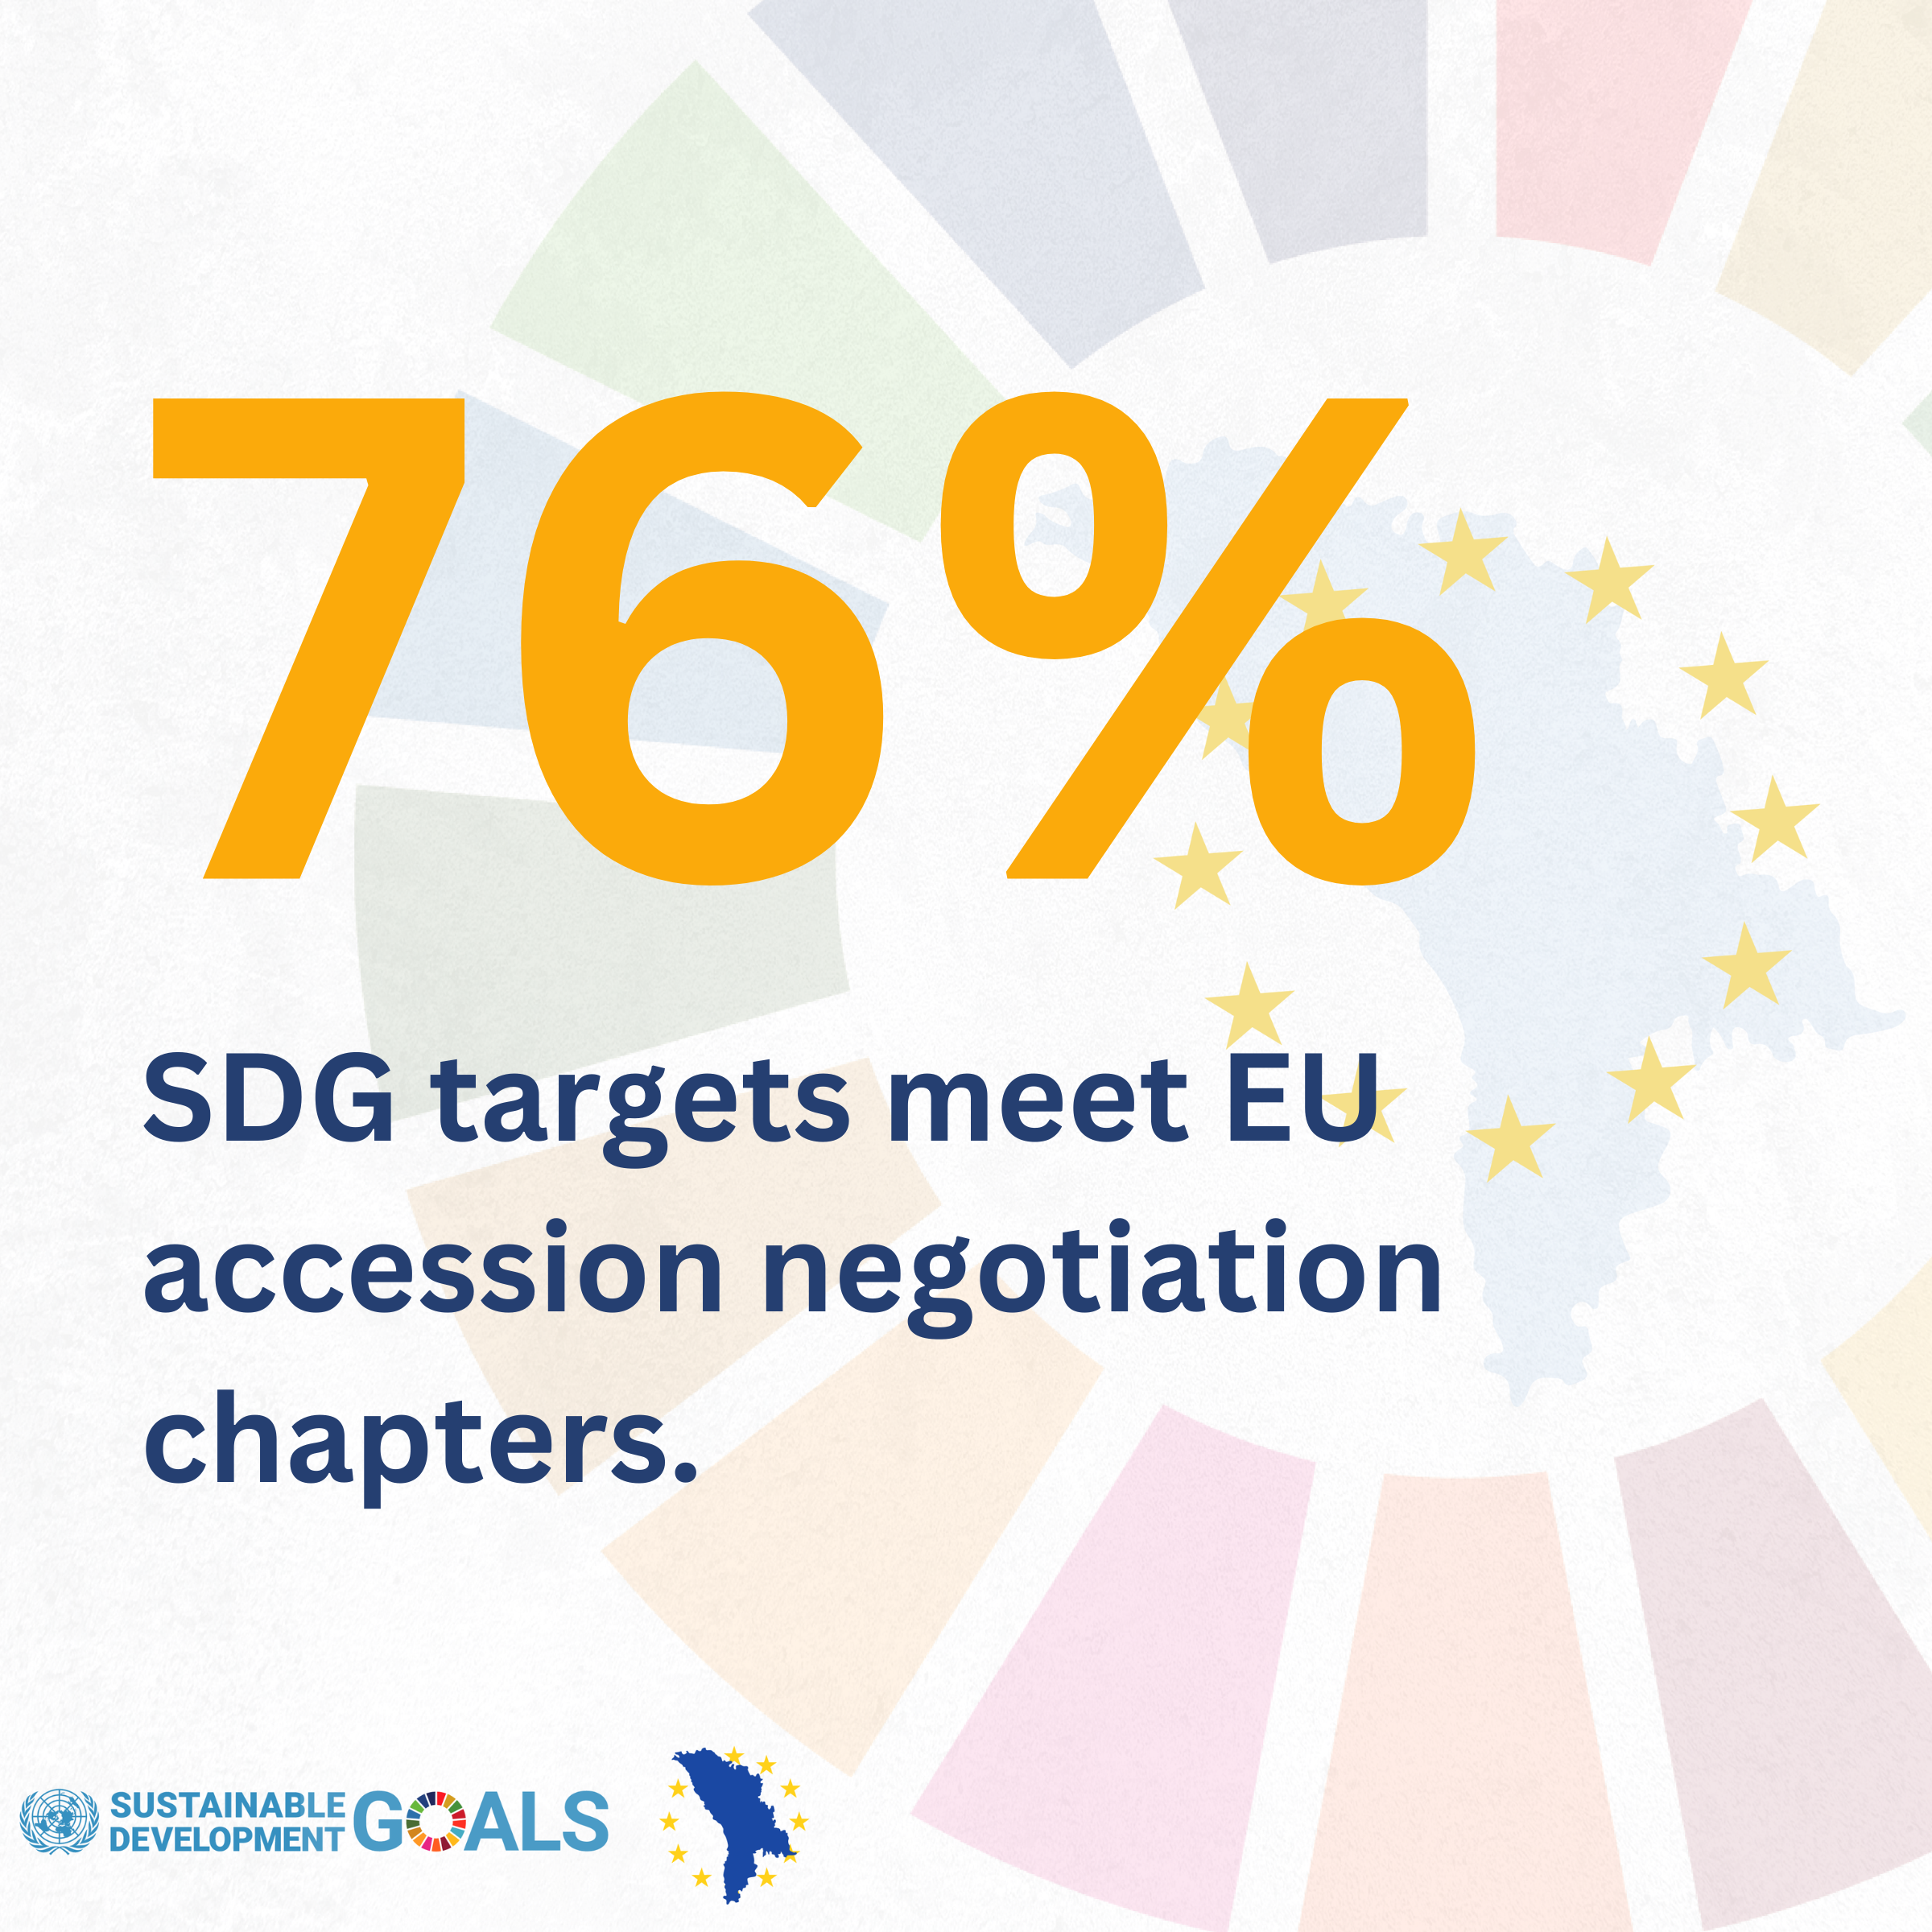 Leveraging the synergies of EU accession and the SDGs for the sustainable development of Moldova